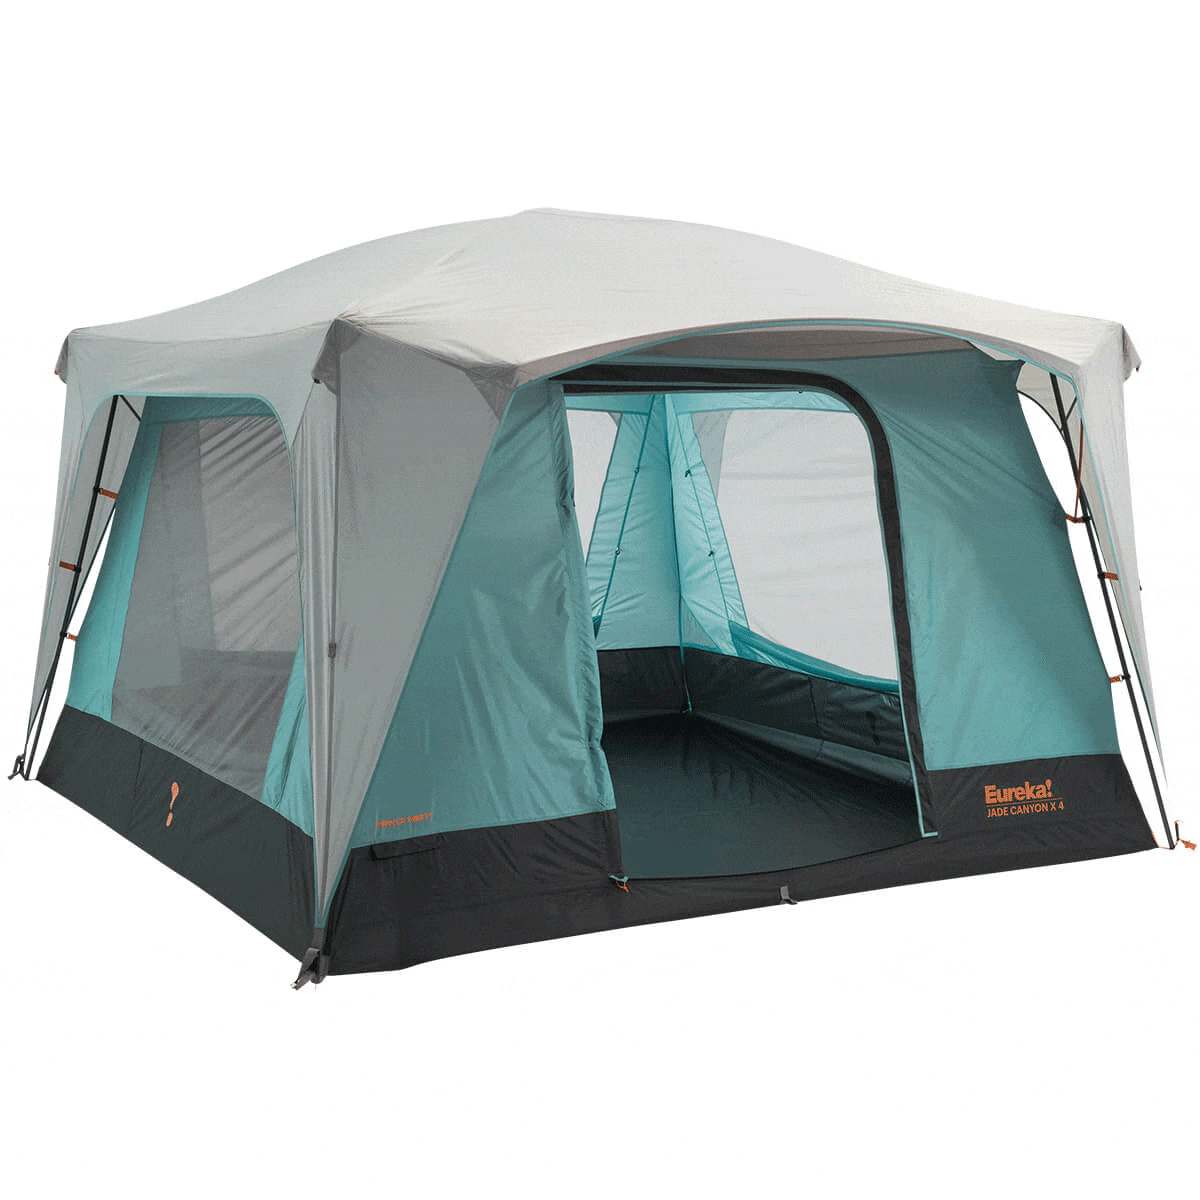 Jade Canyon X4 tent with fly on